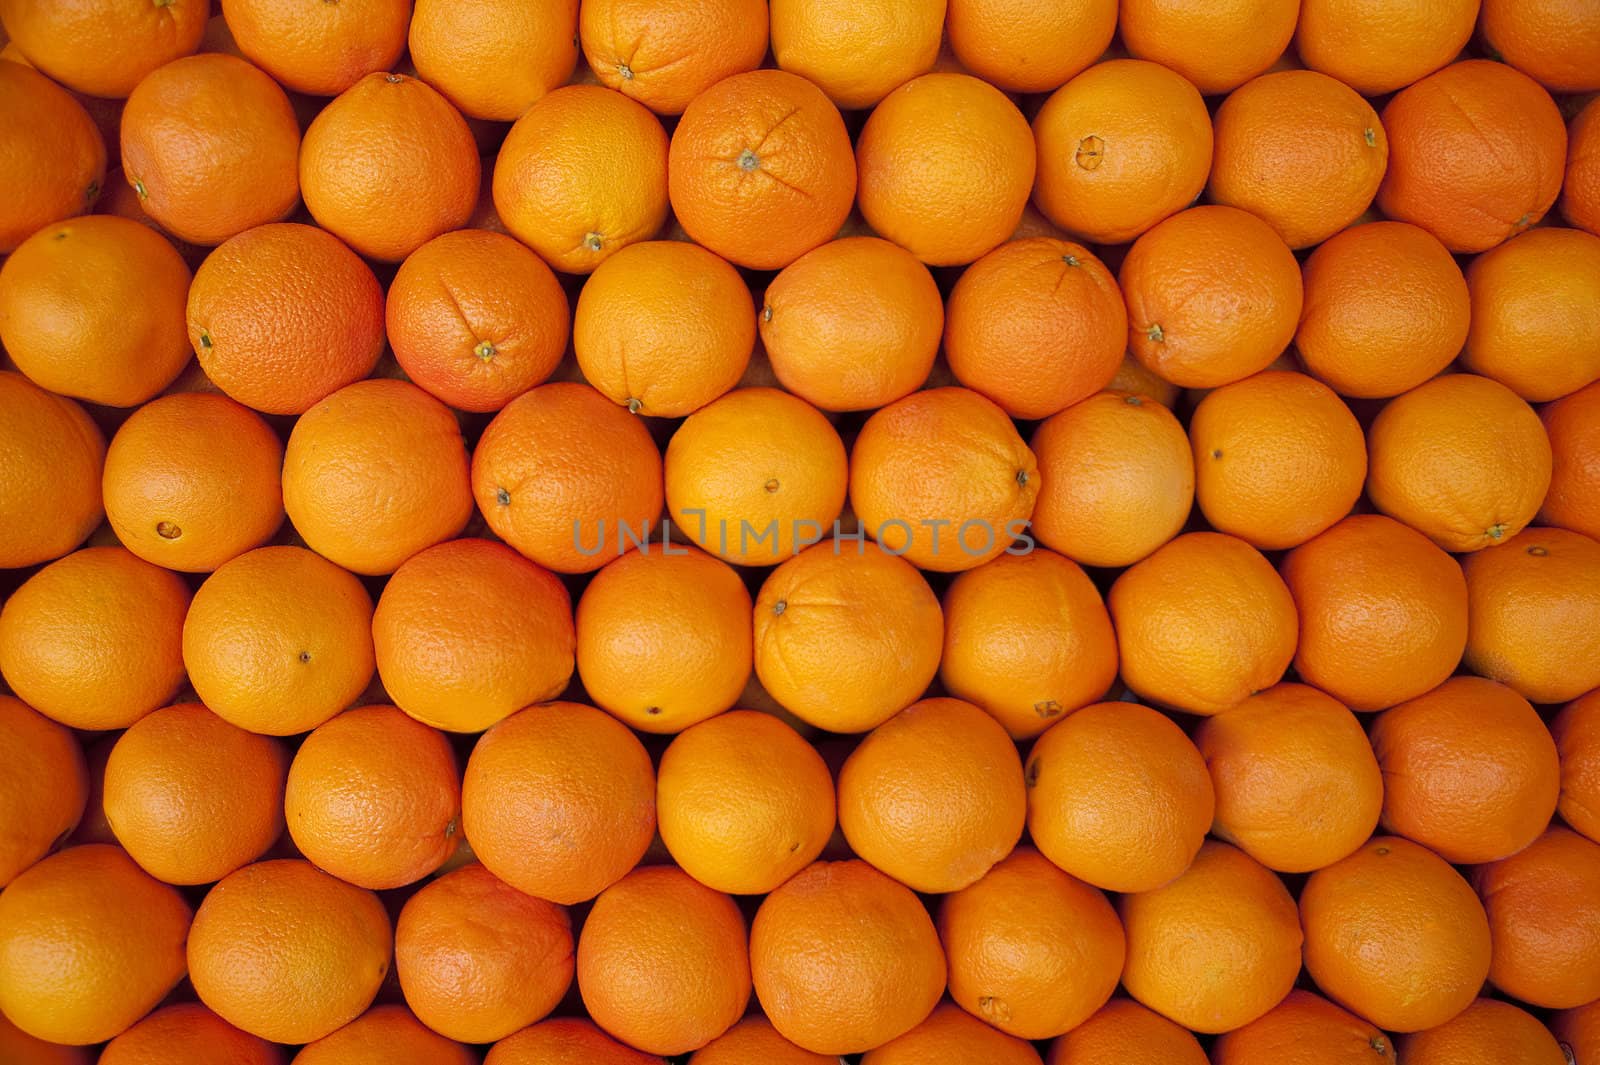 Oranges by f/2sumicron